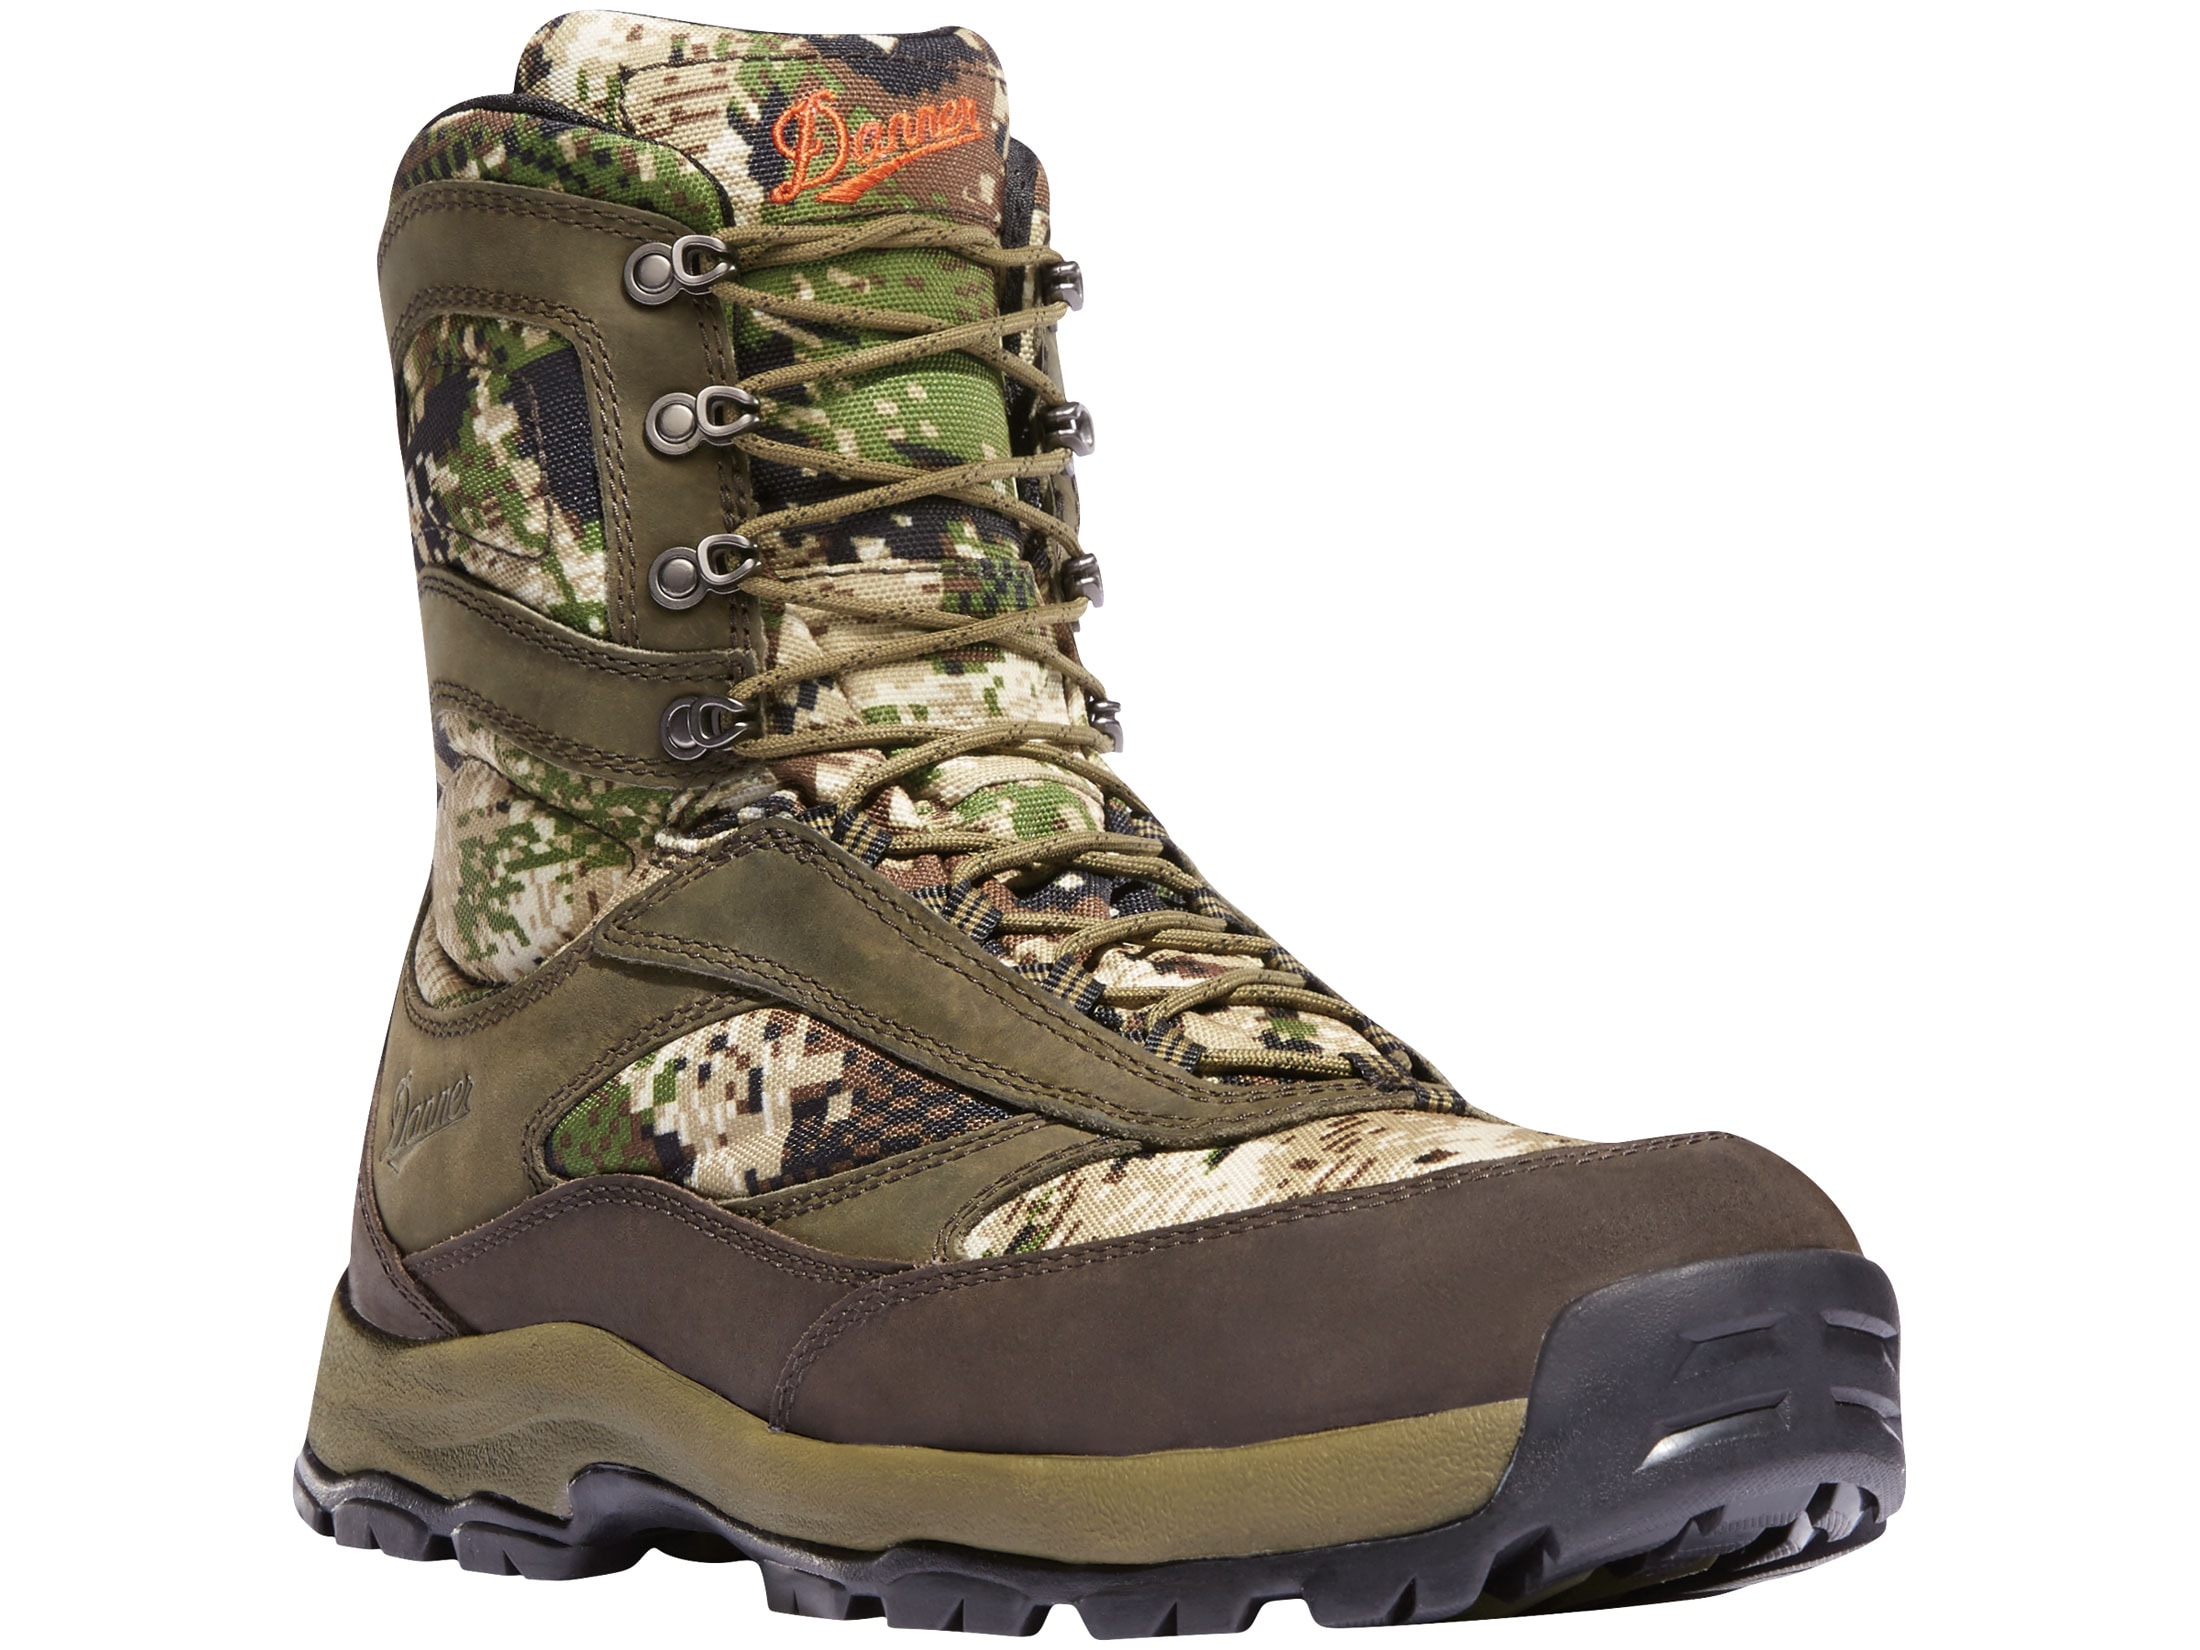 Danner High Ground 8 GORE-TEX Hunting Boots Leather Nylon Realtree